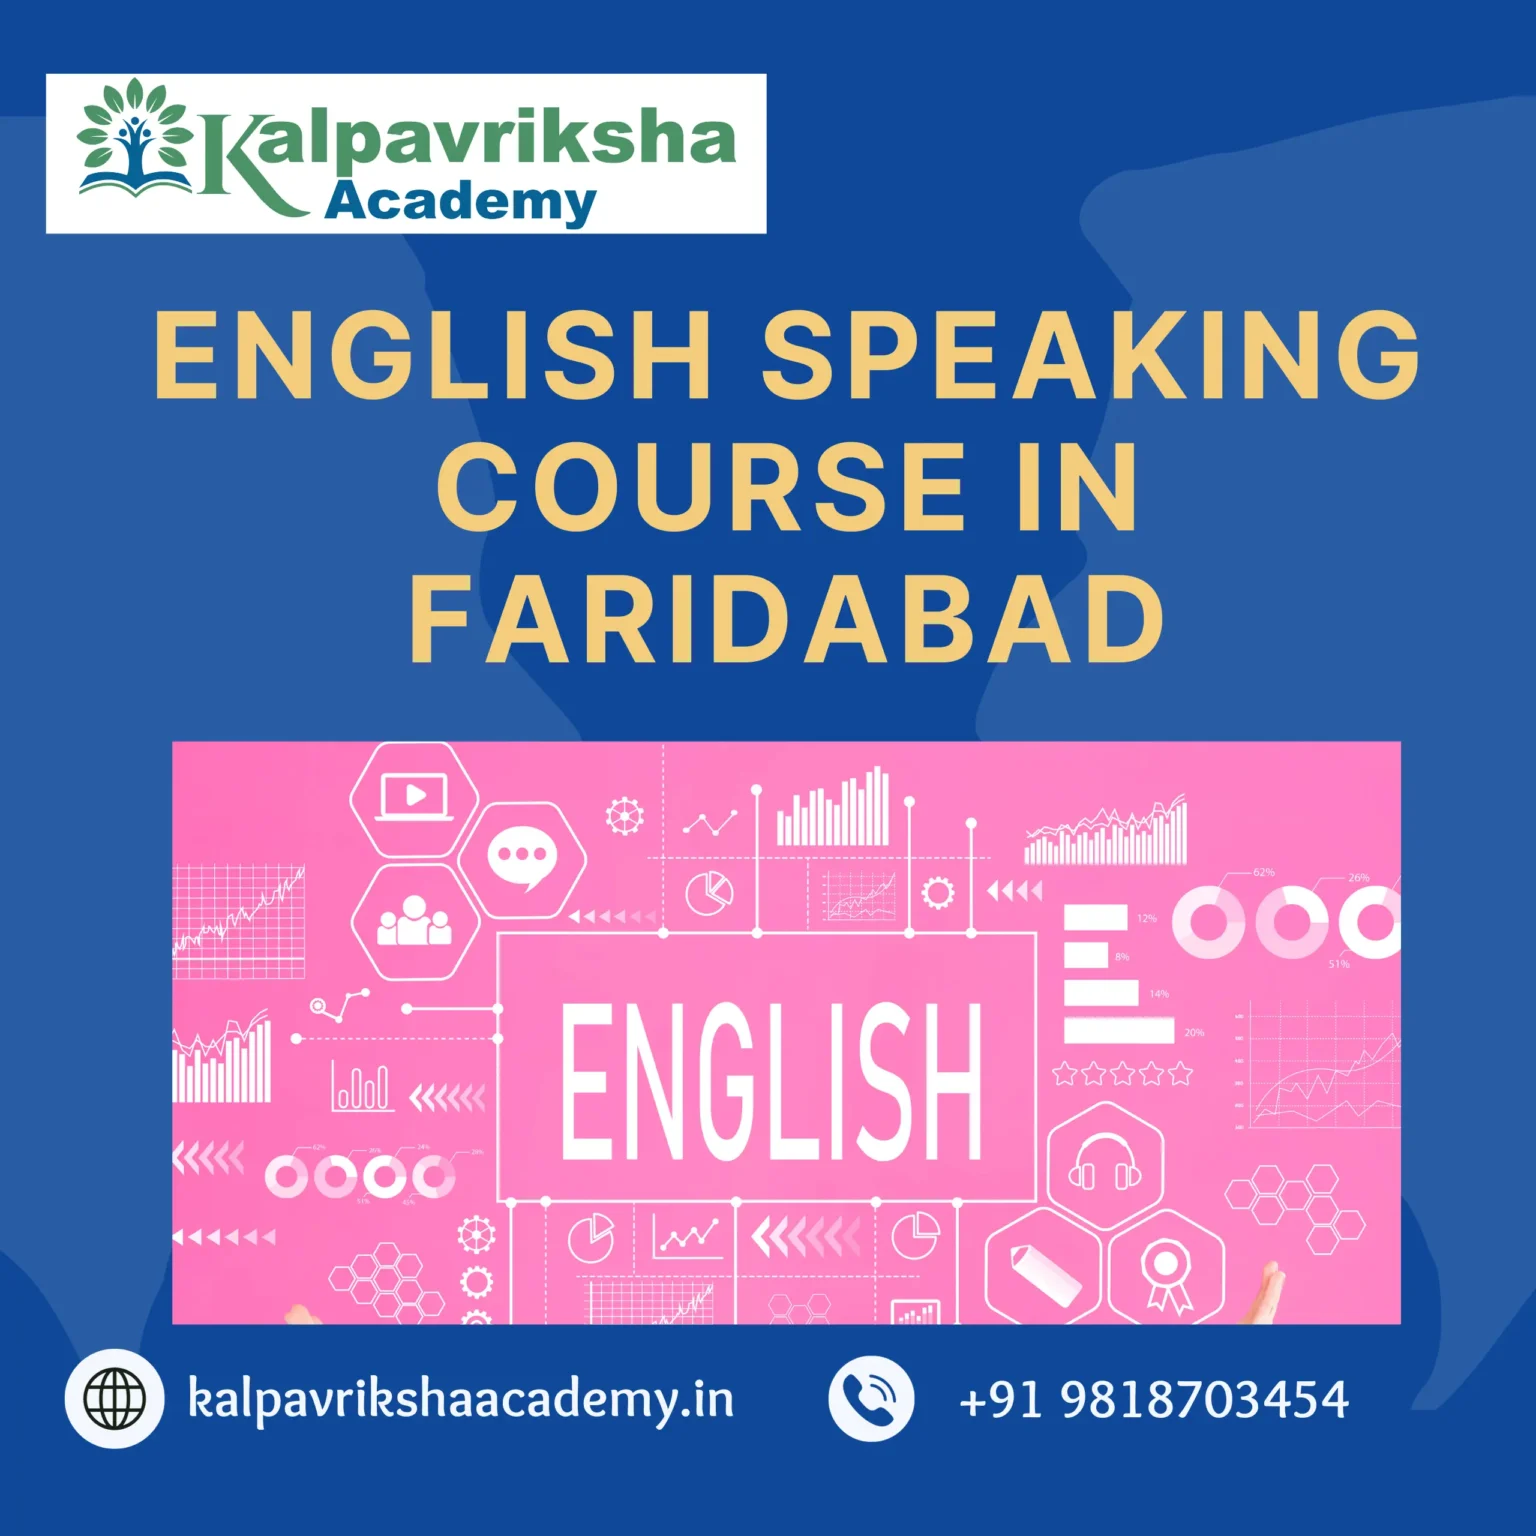 Online English Speaking Course in Faridabad